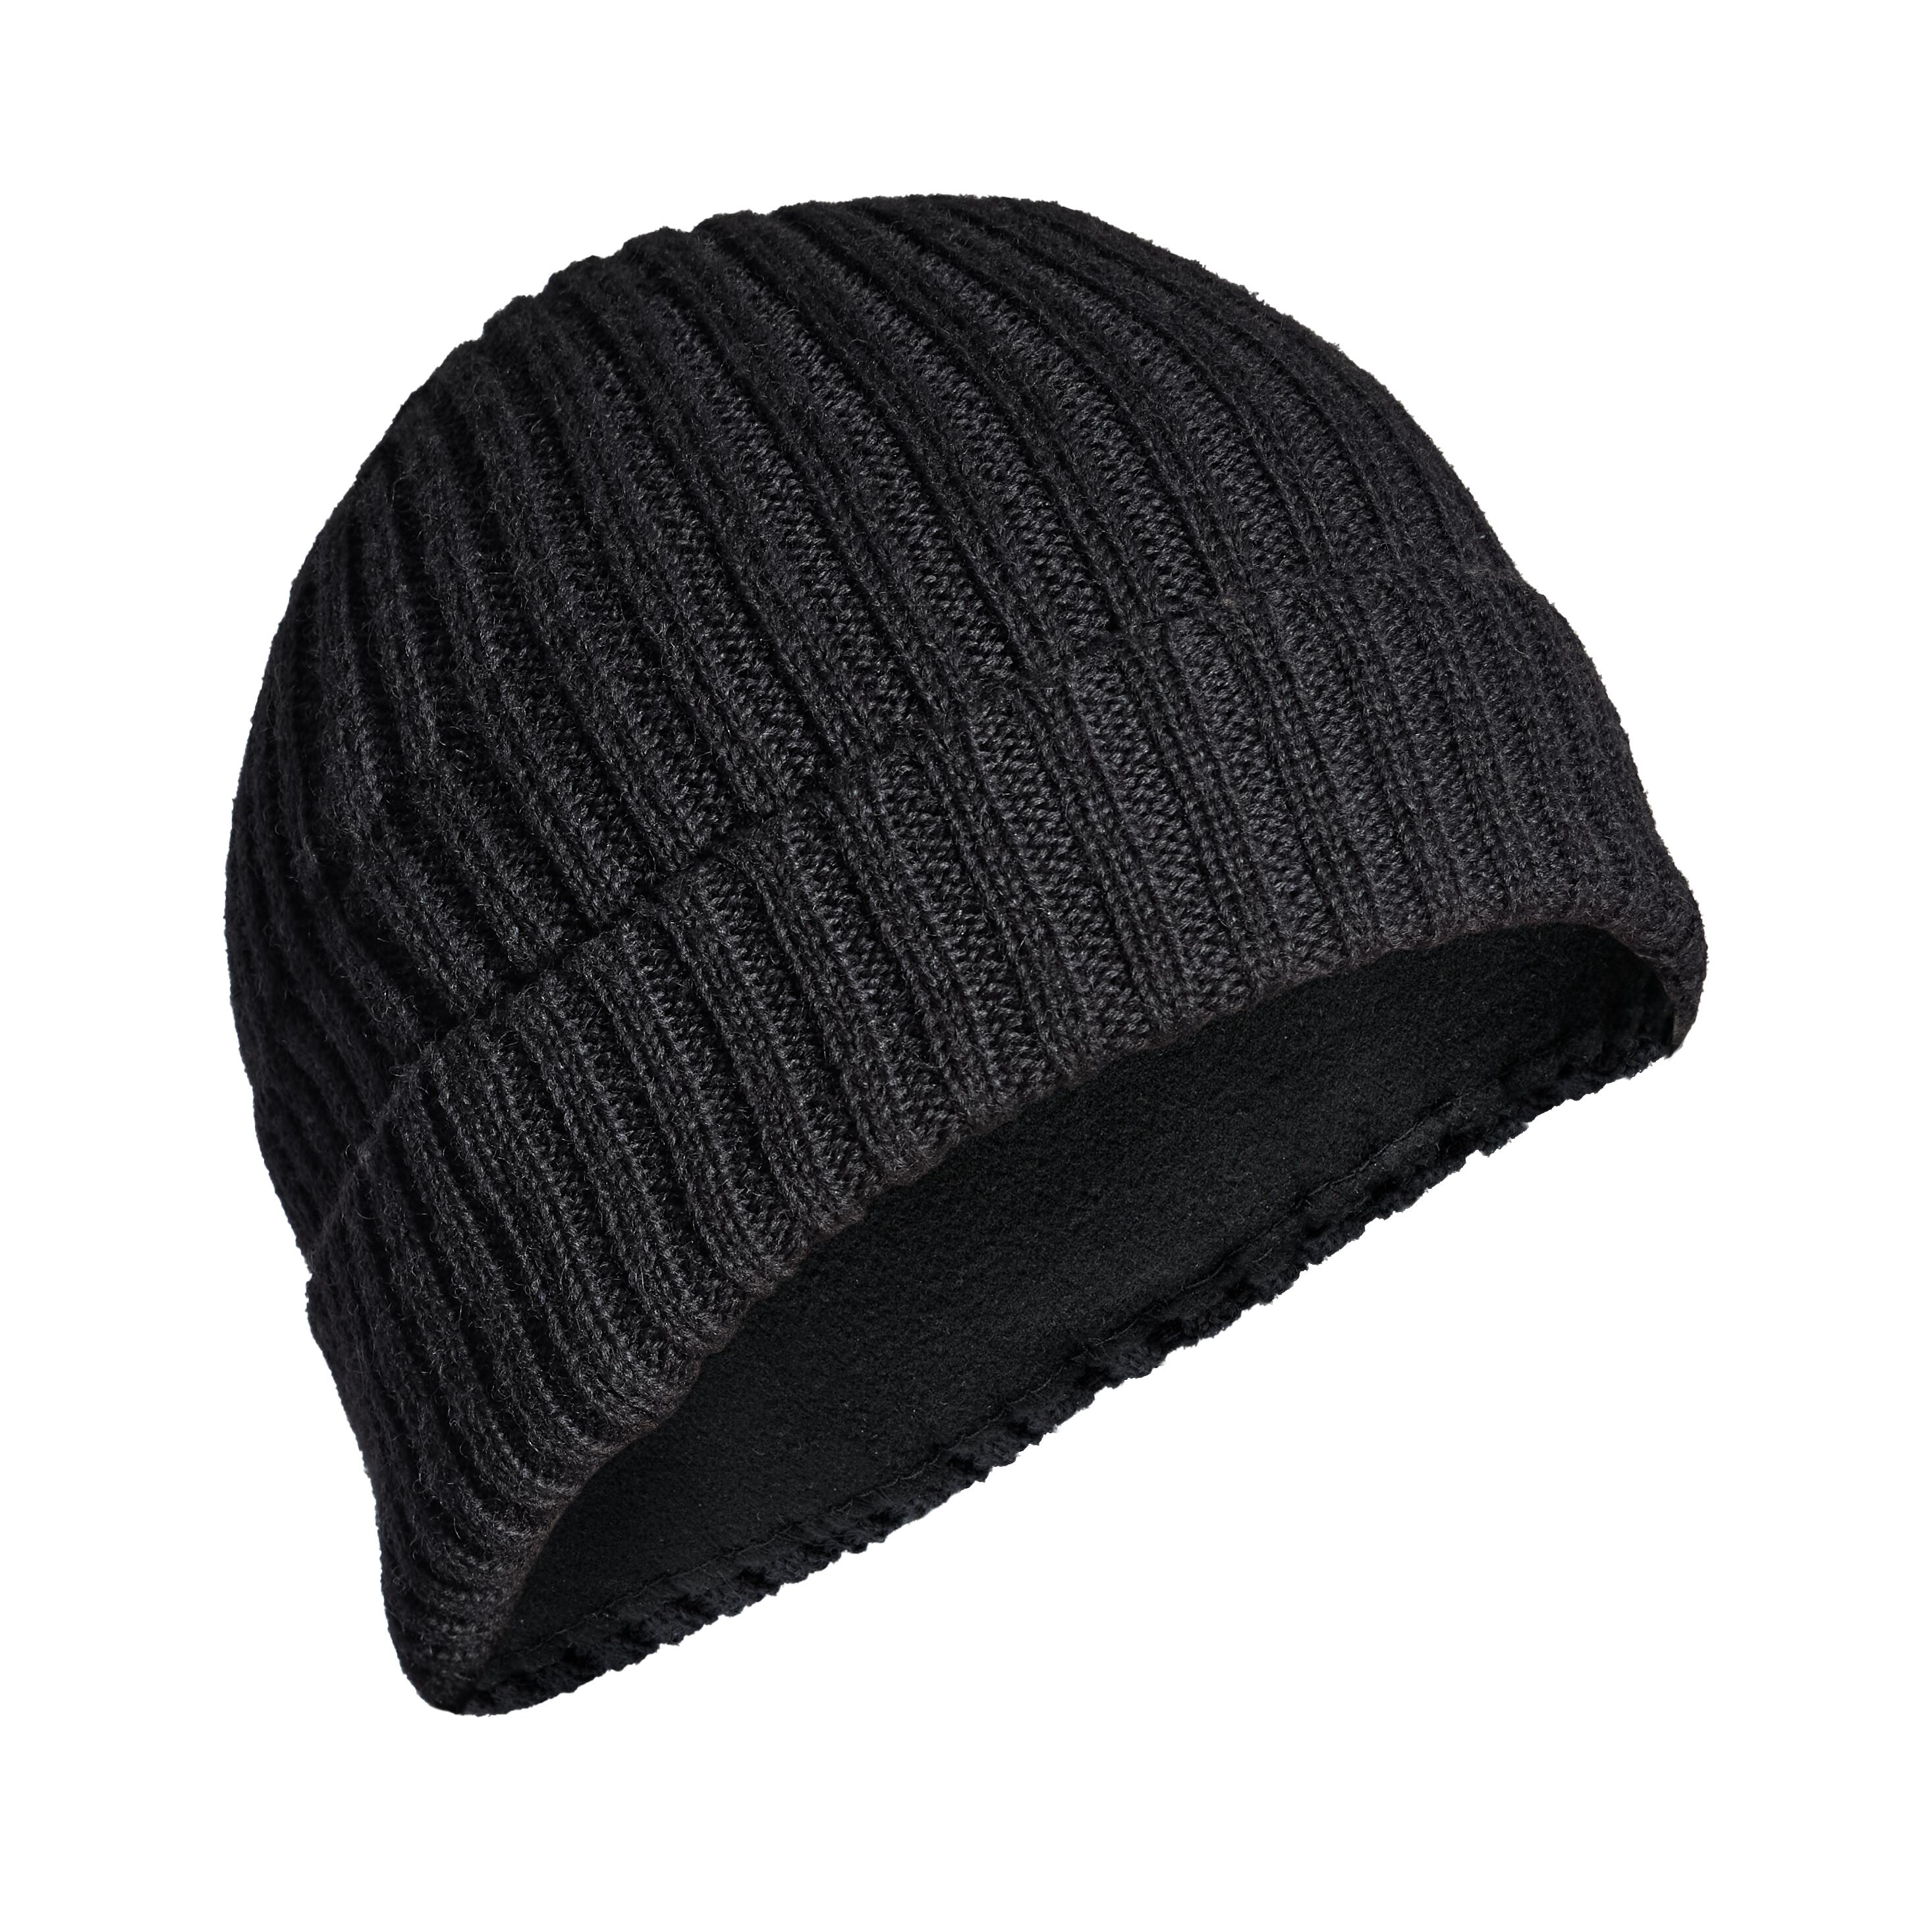 KNITTED WOOL HAT 900 BLACK 4/7